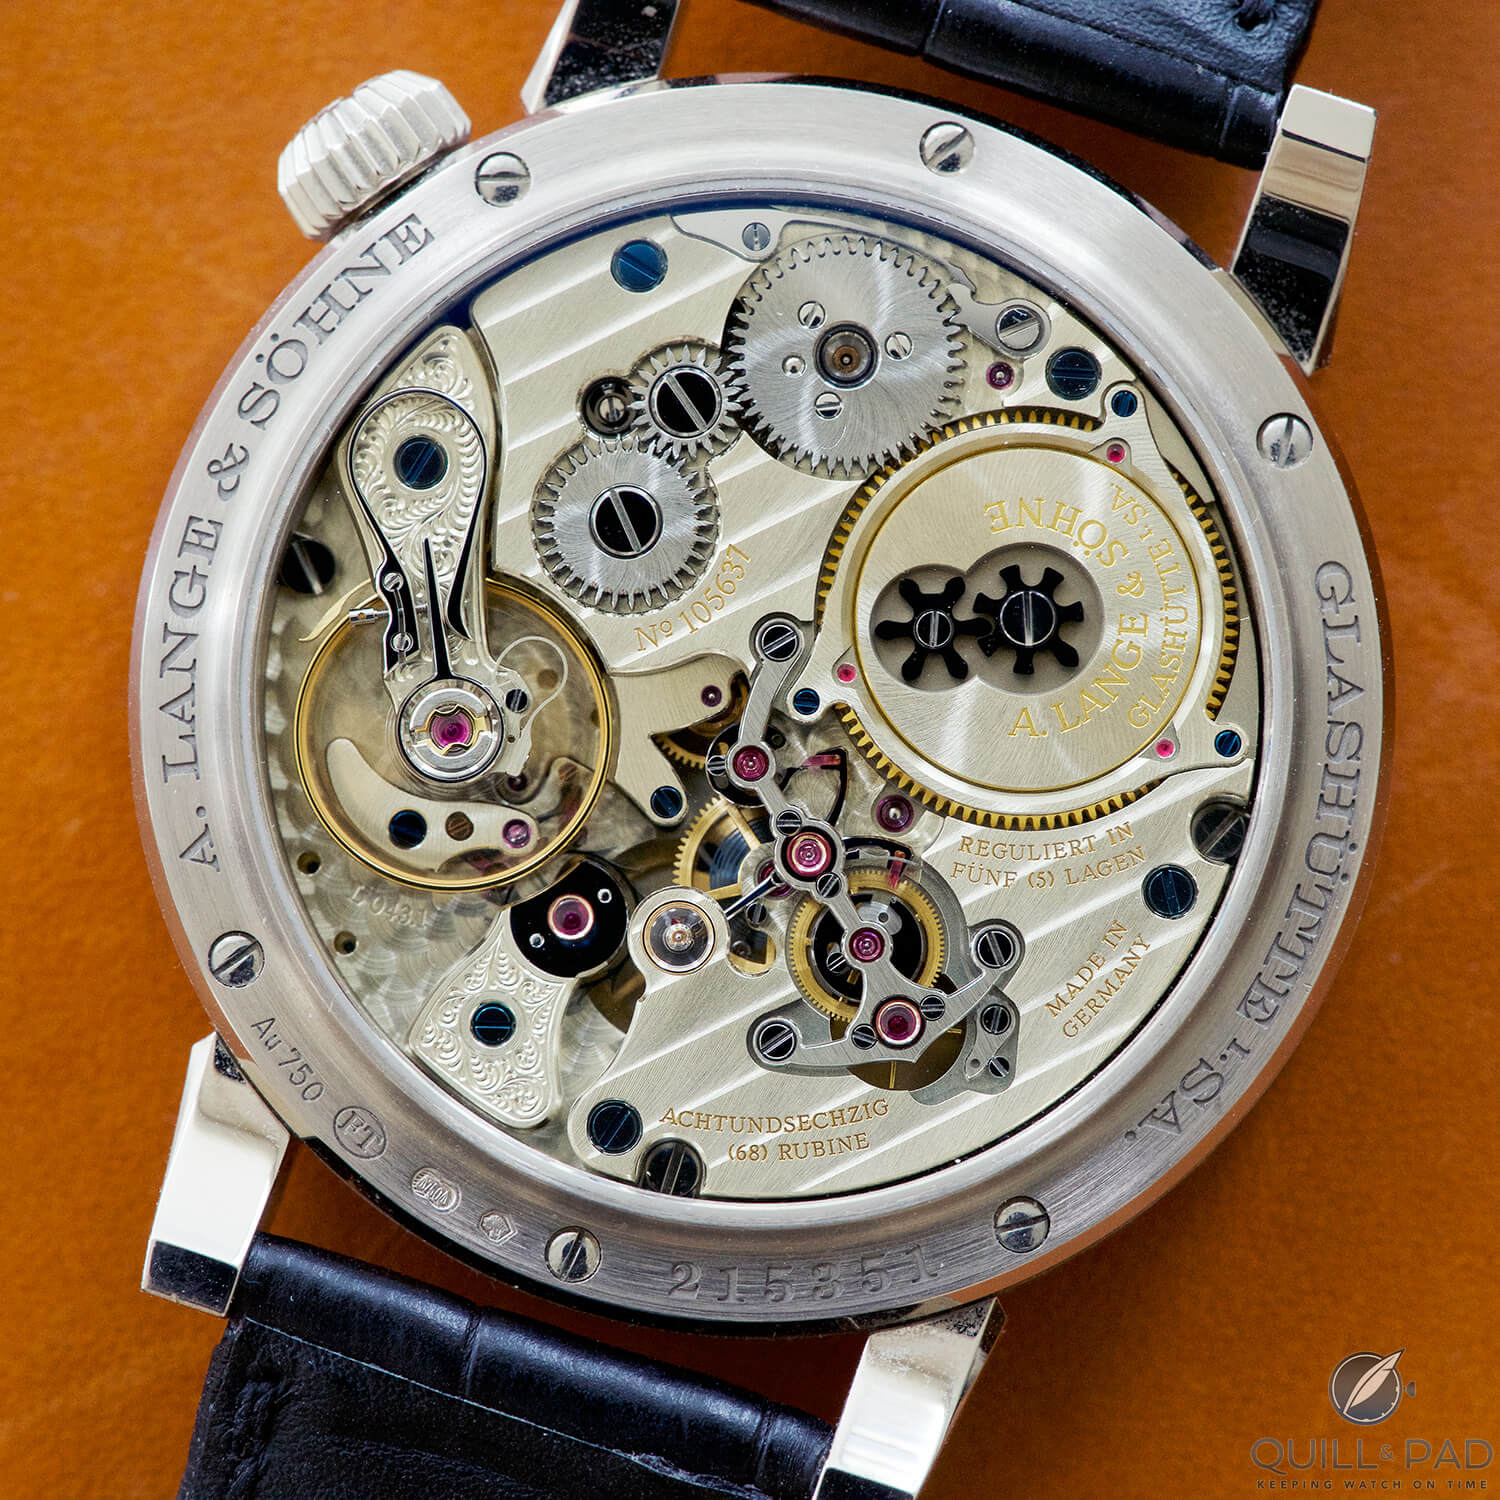 Caliber L043.1 with constant-force escapement visible through the display back of the A. Lange & Söhne Zeitwerk